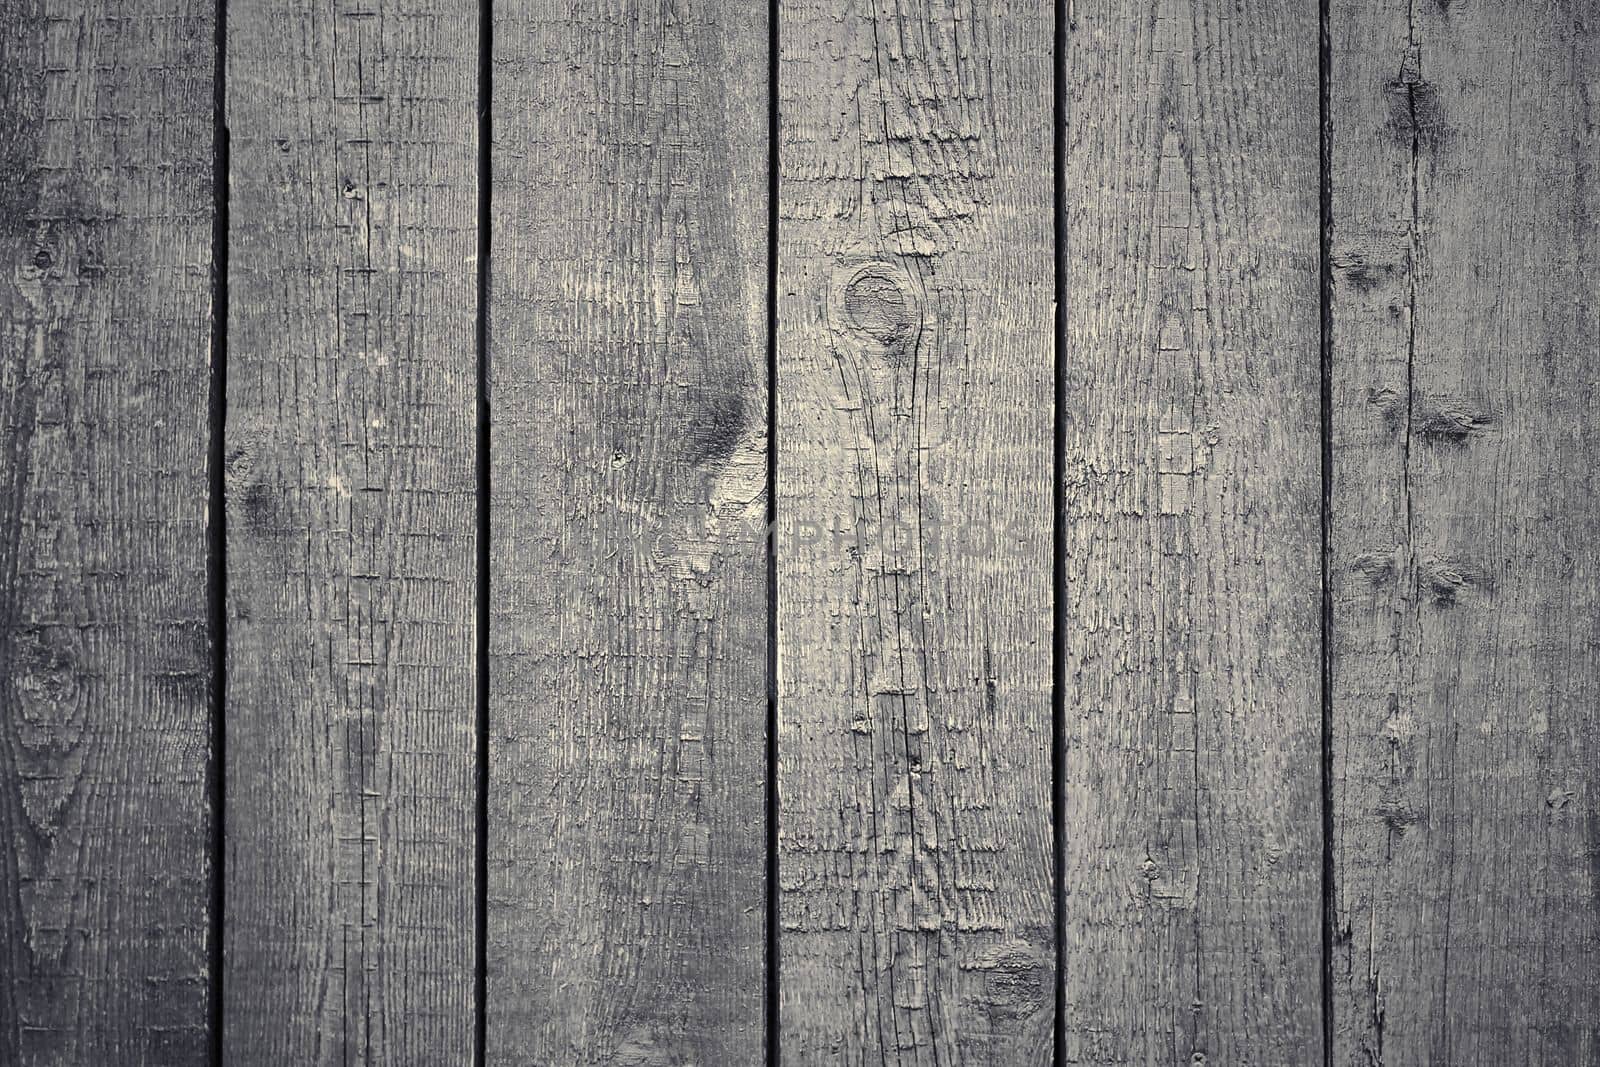 Wooden surface of planks and grain textures in a high resolution